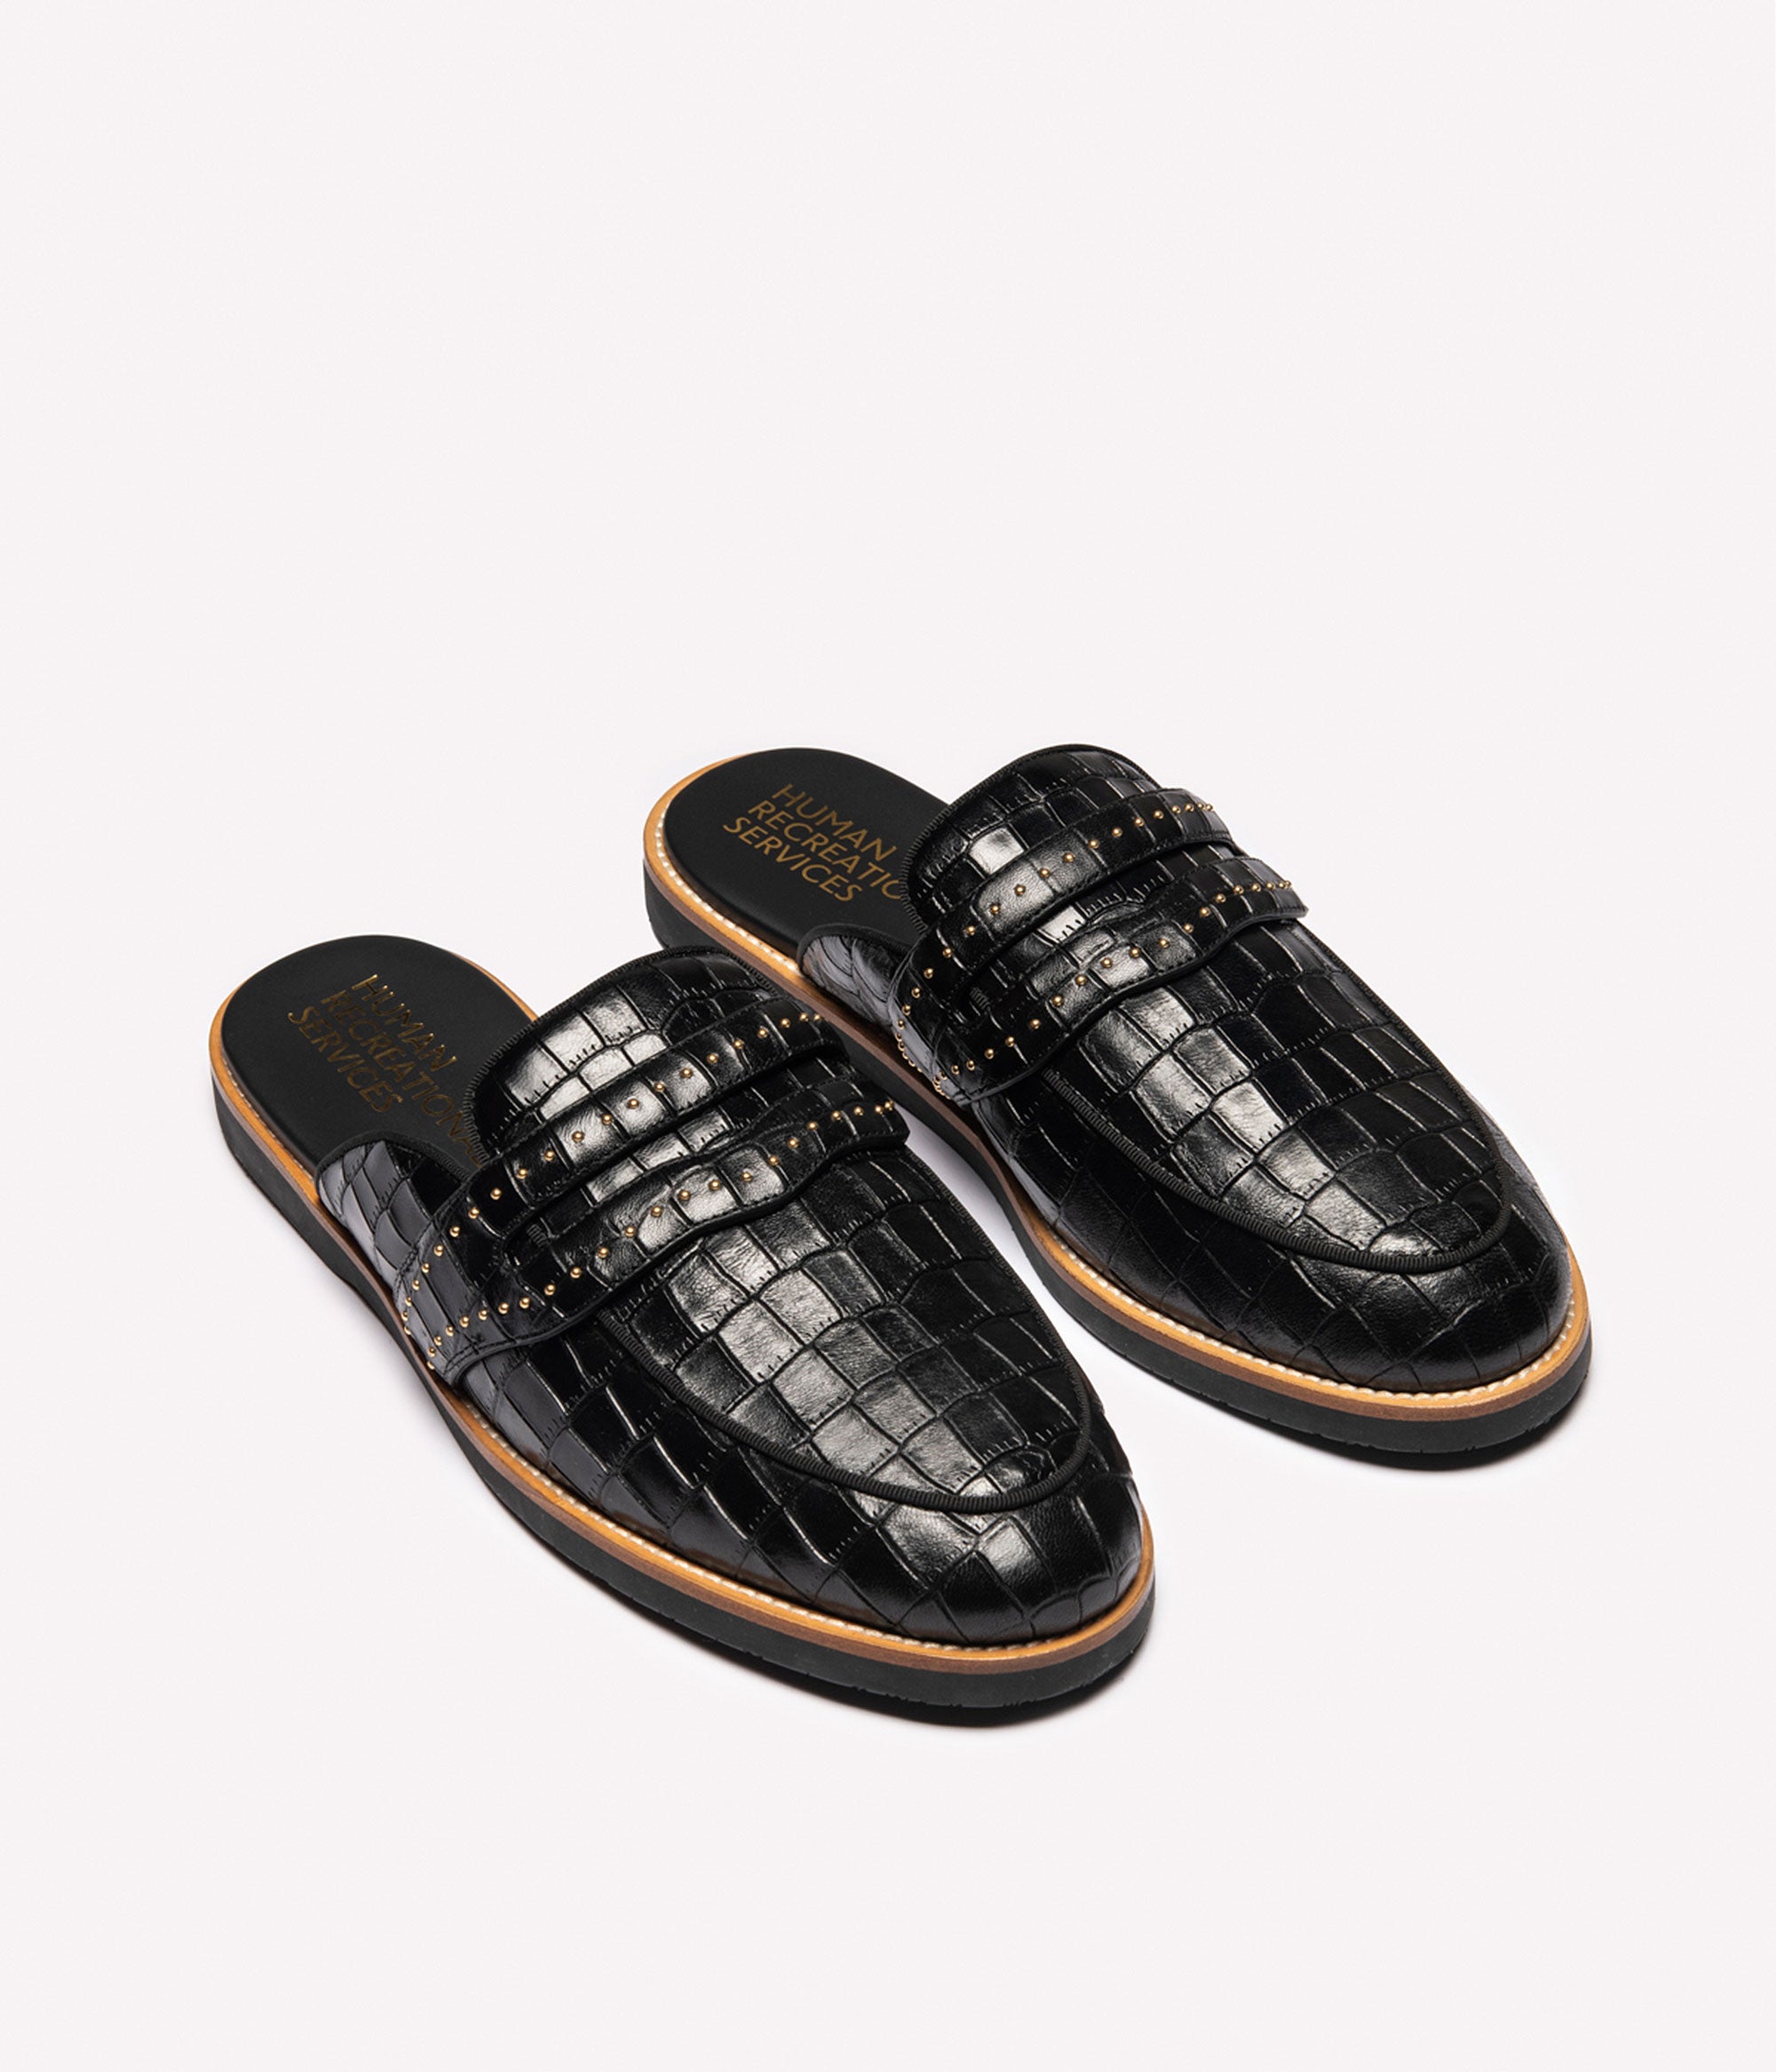 HUMAN RECREATIONAL SERVICES PALAZZO SLIPPER IN STUD BLACK MADE WITH ITALIAN CALF SKIN